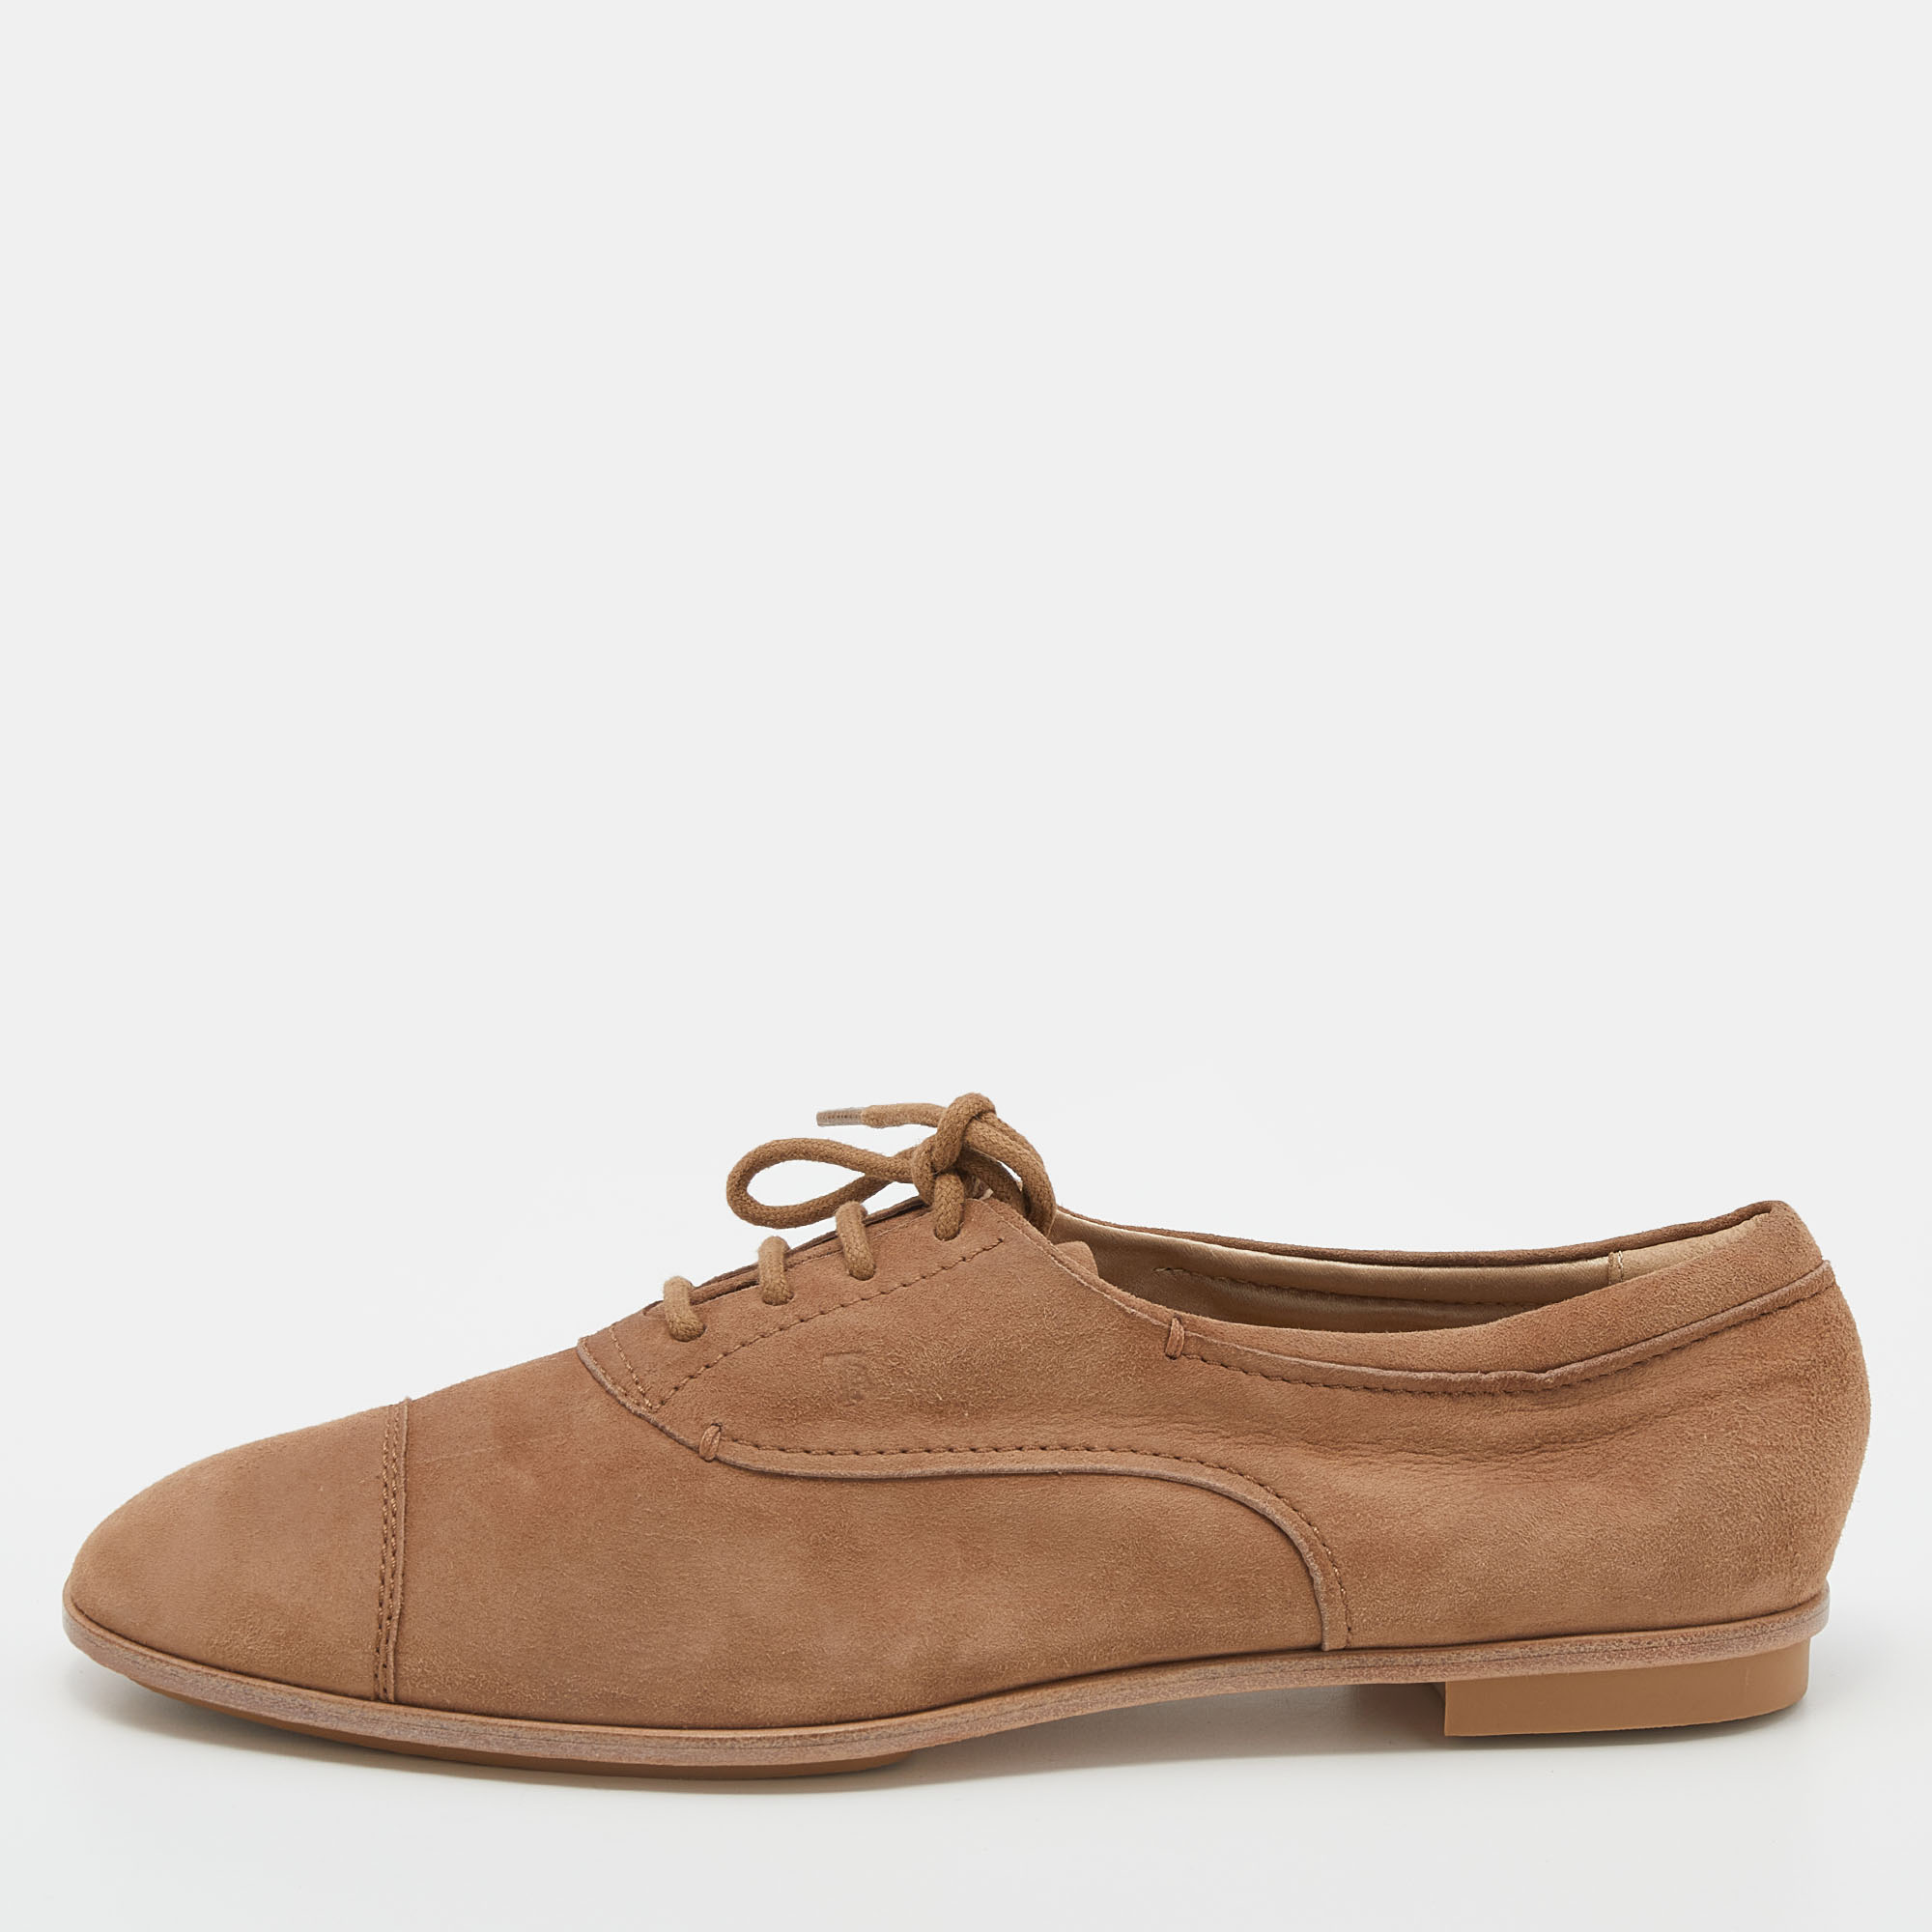 These Tods sneakers for women are perfect for days when you wish for comfort and style The shoes are crafted from brown suede and feature closed toes lace ups on the vamps and durable soles.